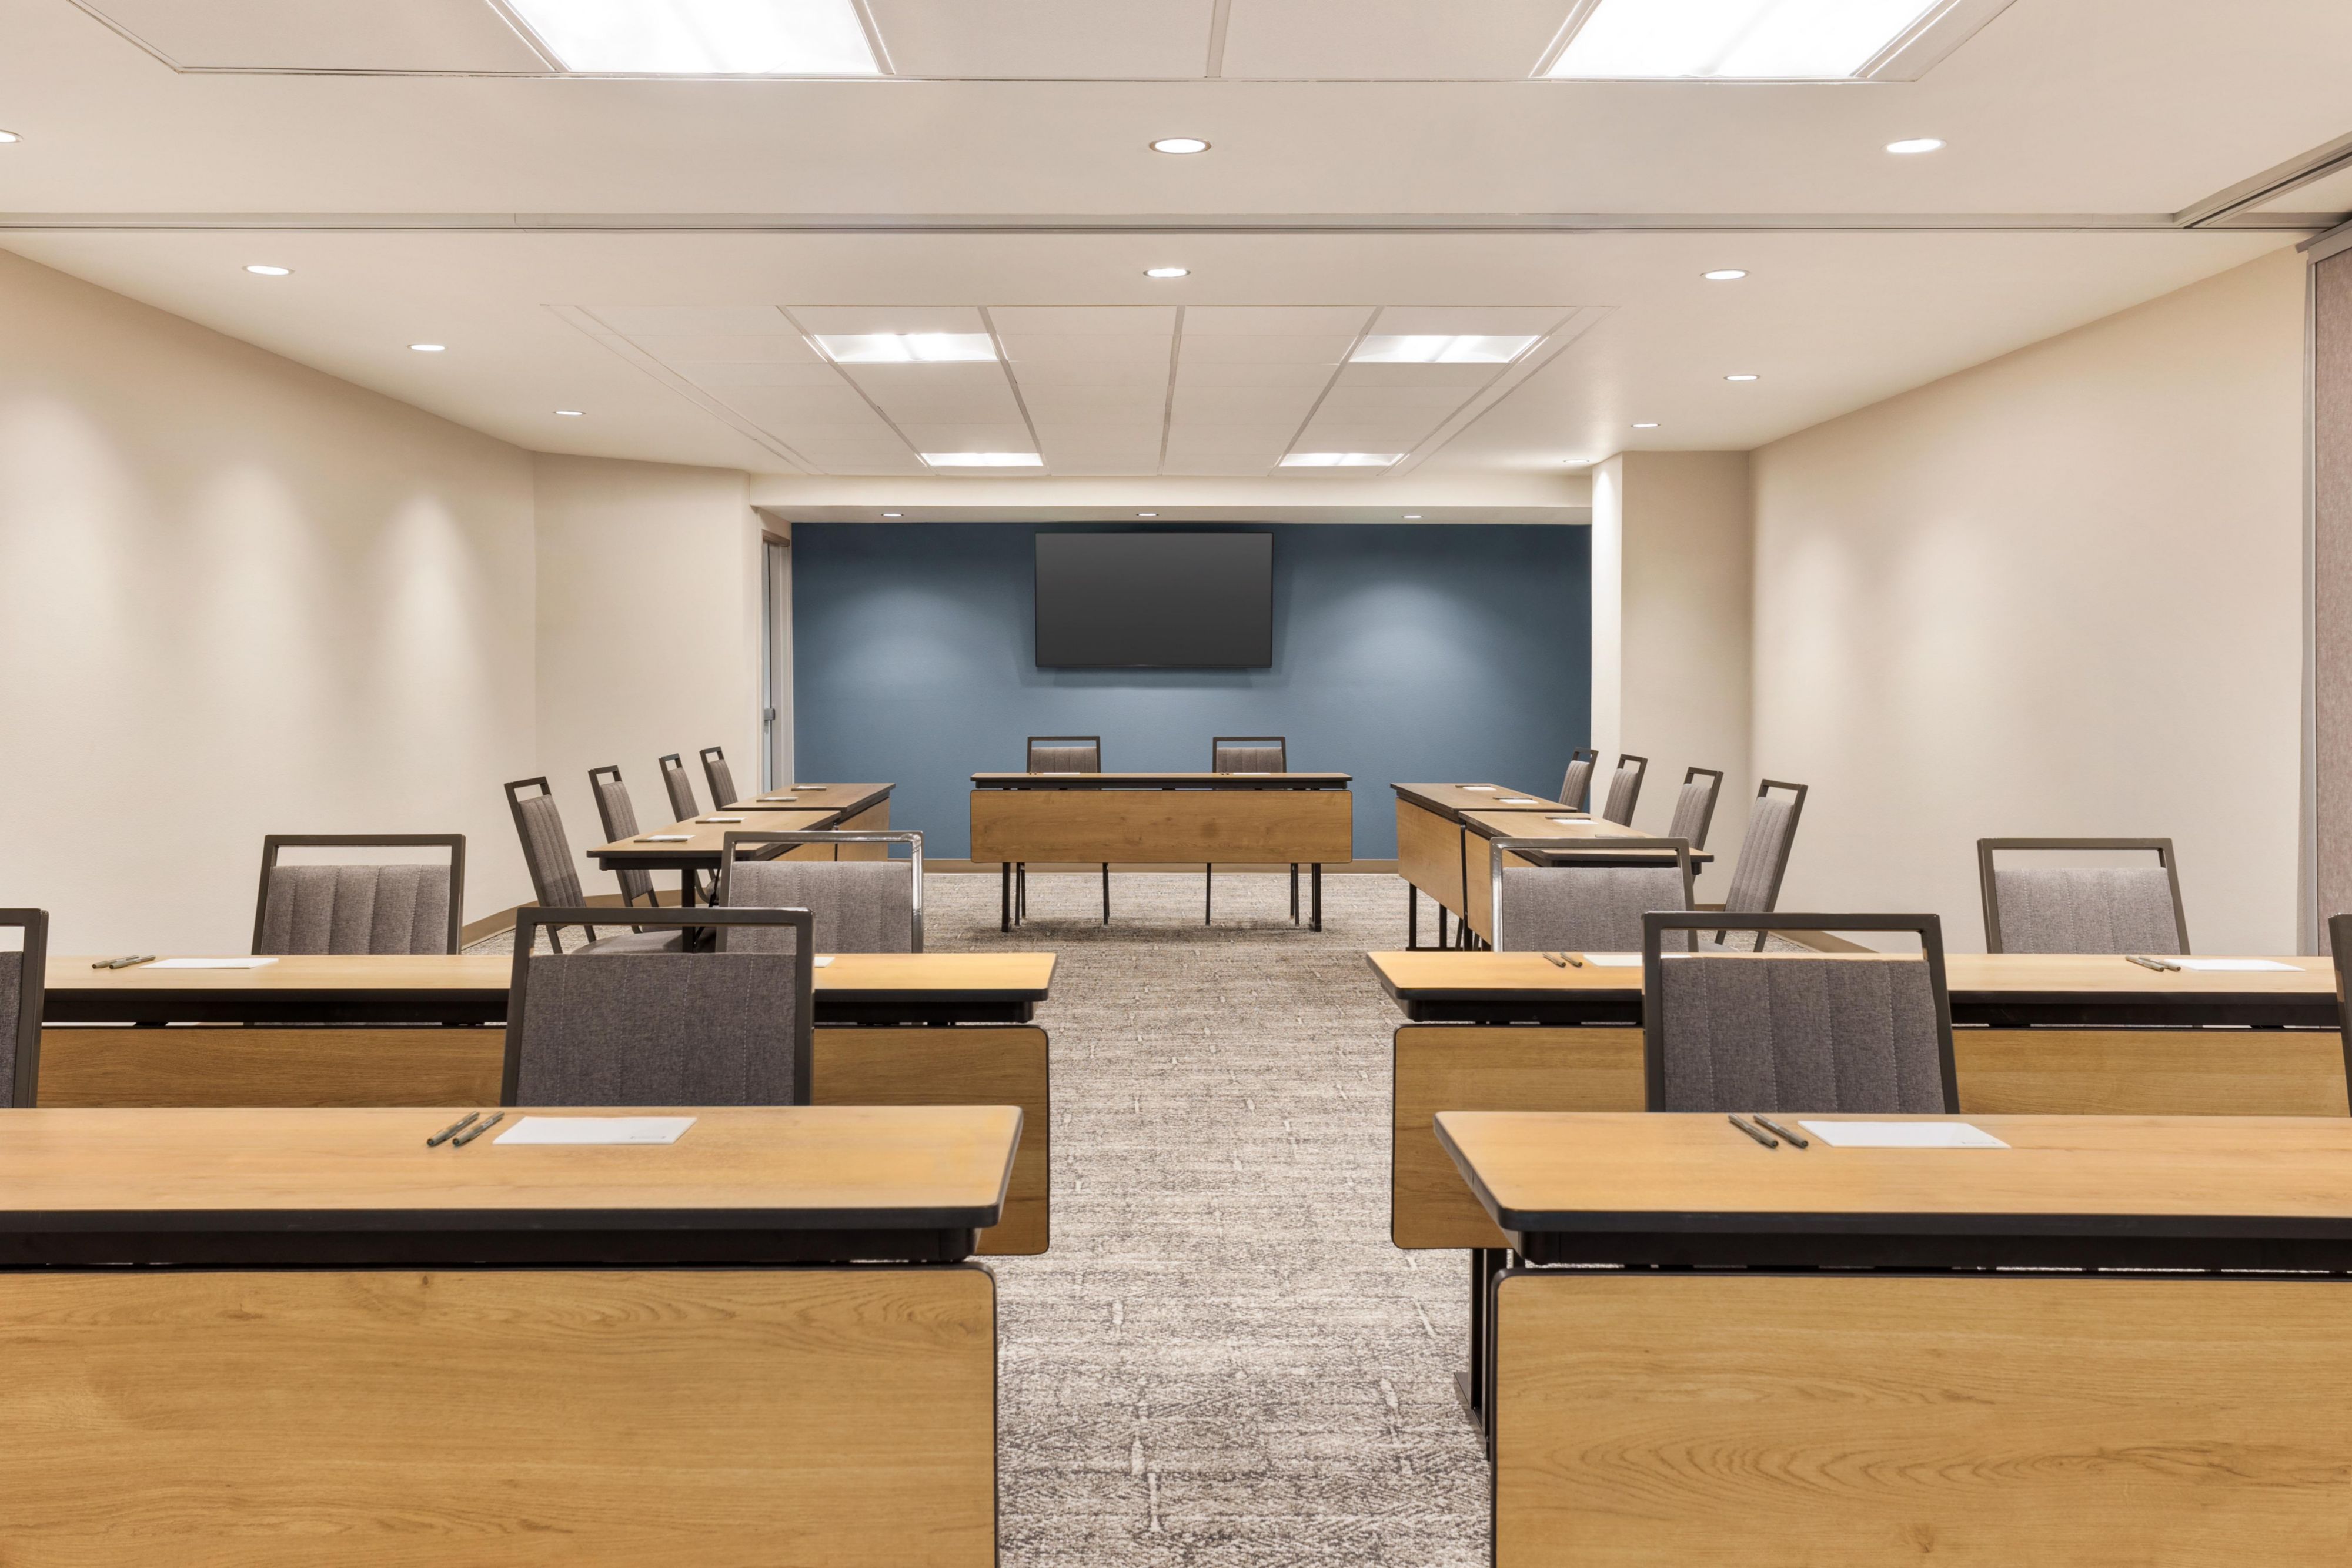 Let us help host your next gathering or corporate meeting in Colorado Springs. We offer 1,060 square feet of space, including partitioned rooms.